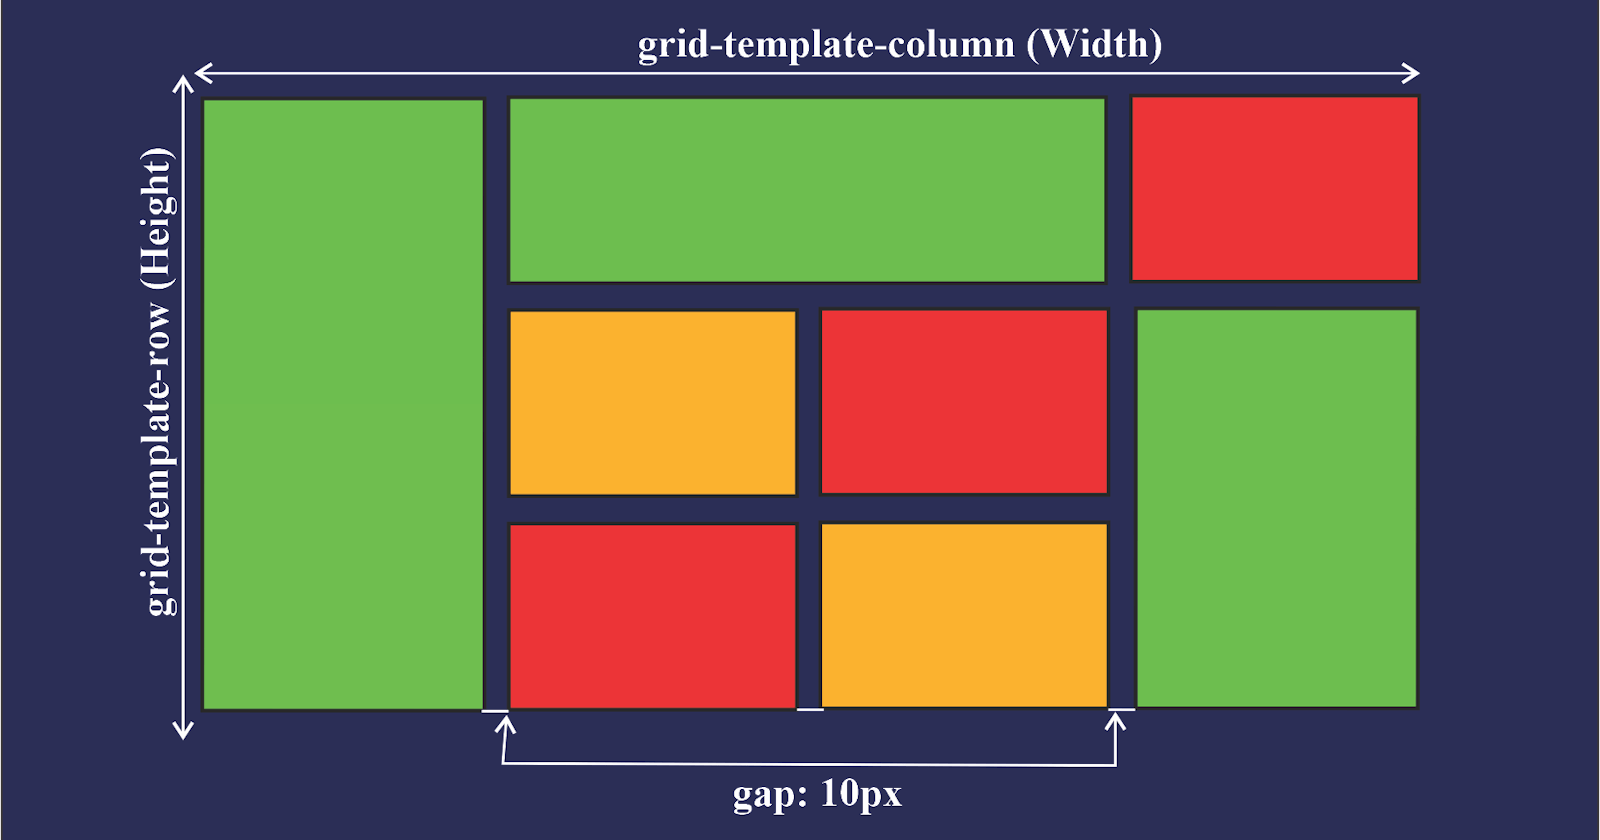 What is Grid in CSS?